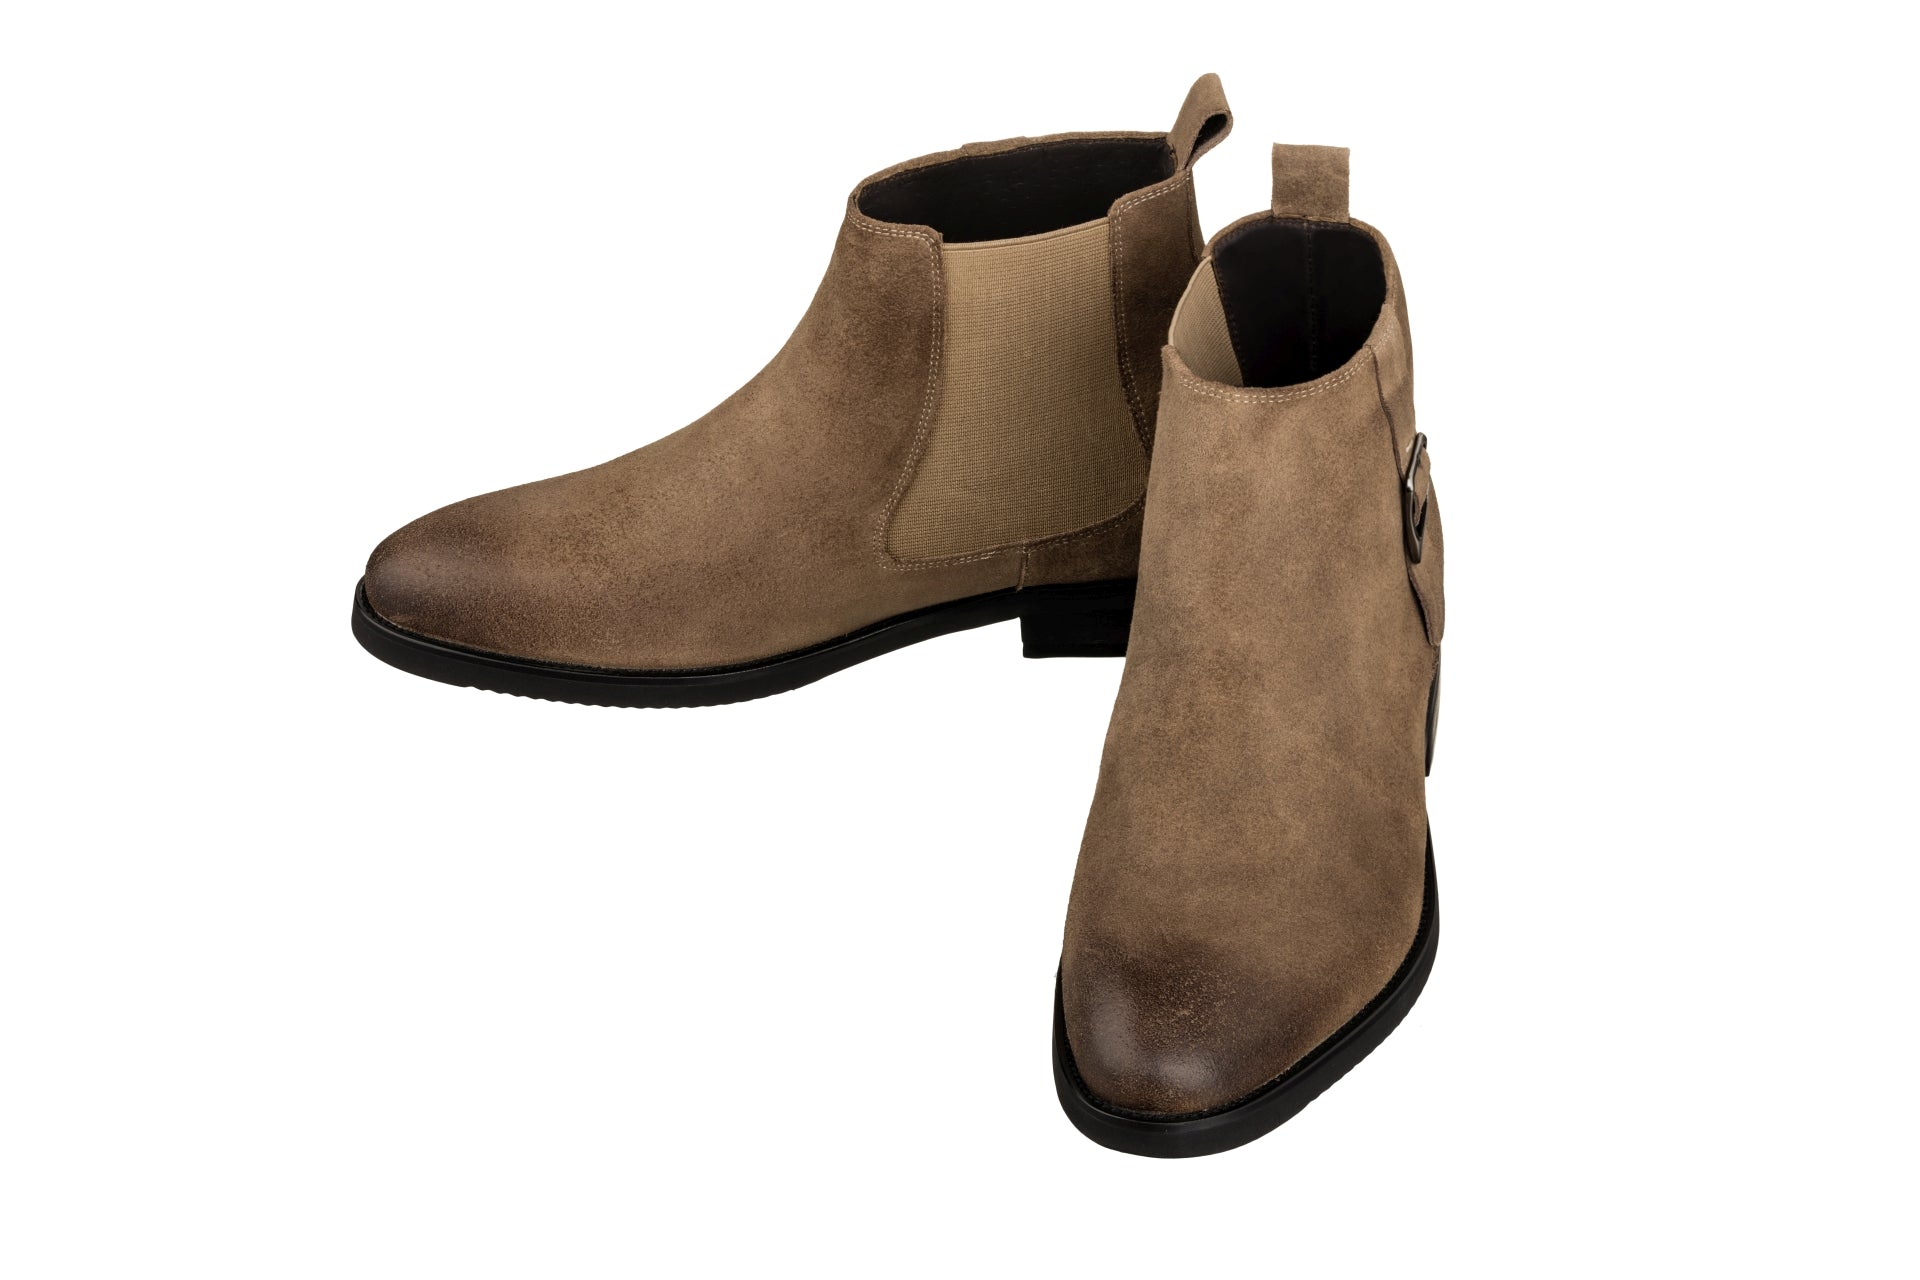 Elevator shoes height increase TOTO - K92083 - 3.0 Inches Taller (Nubuck Coffee Brown) - Chelsea Ankle Boots